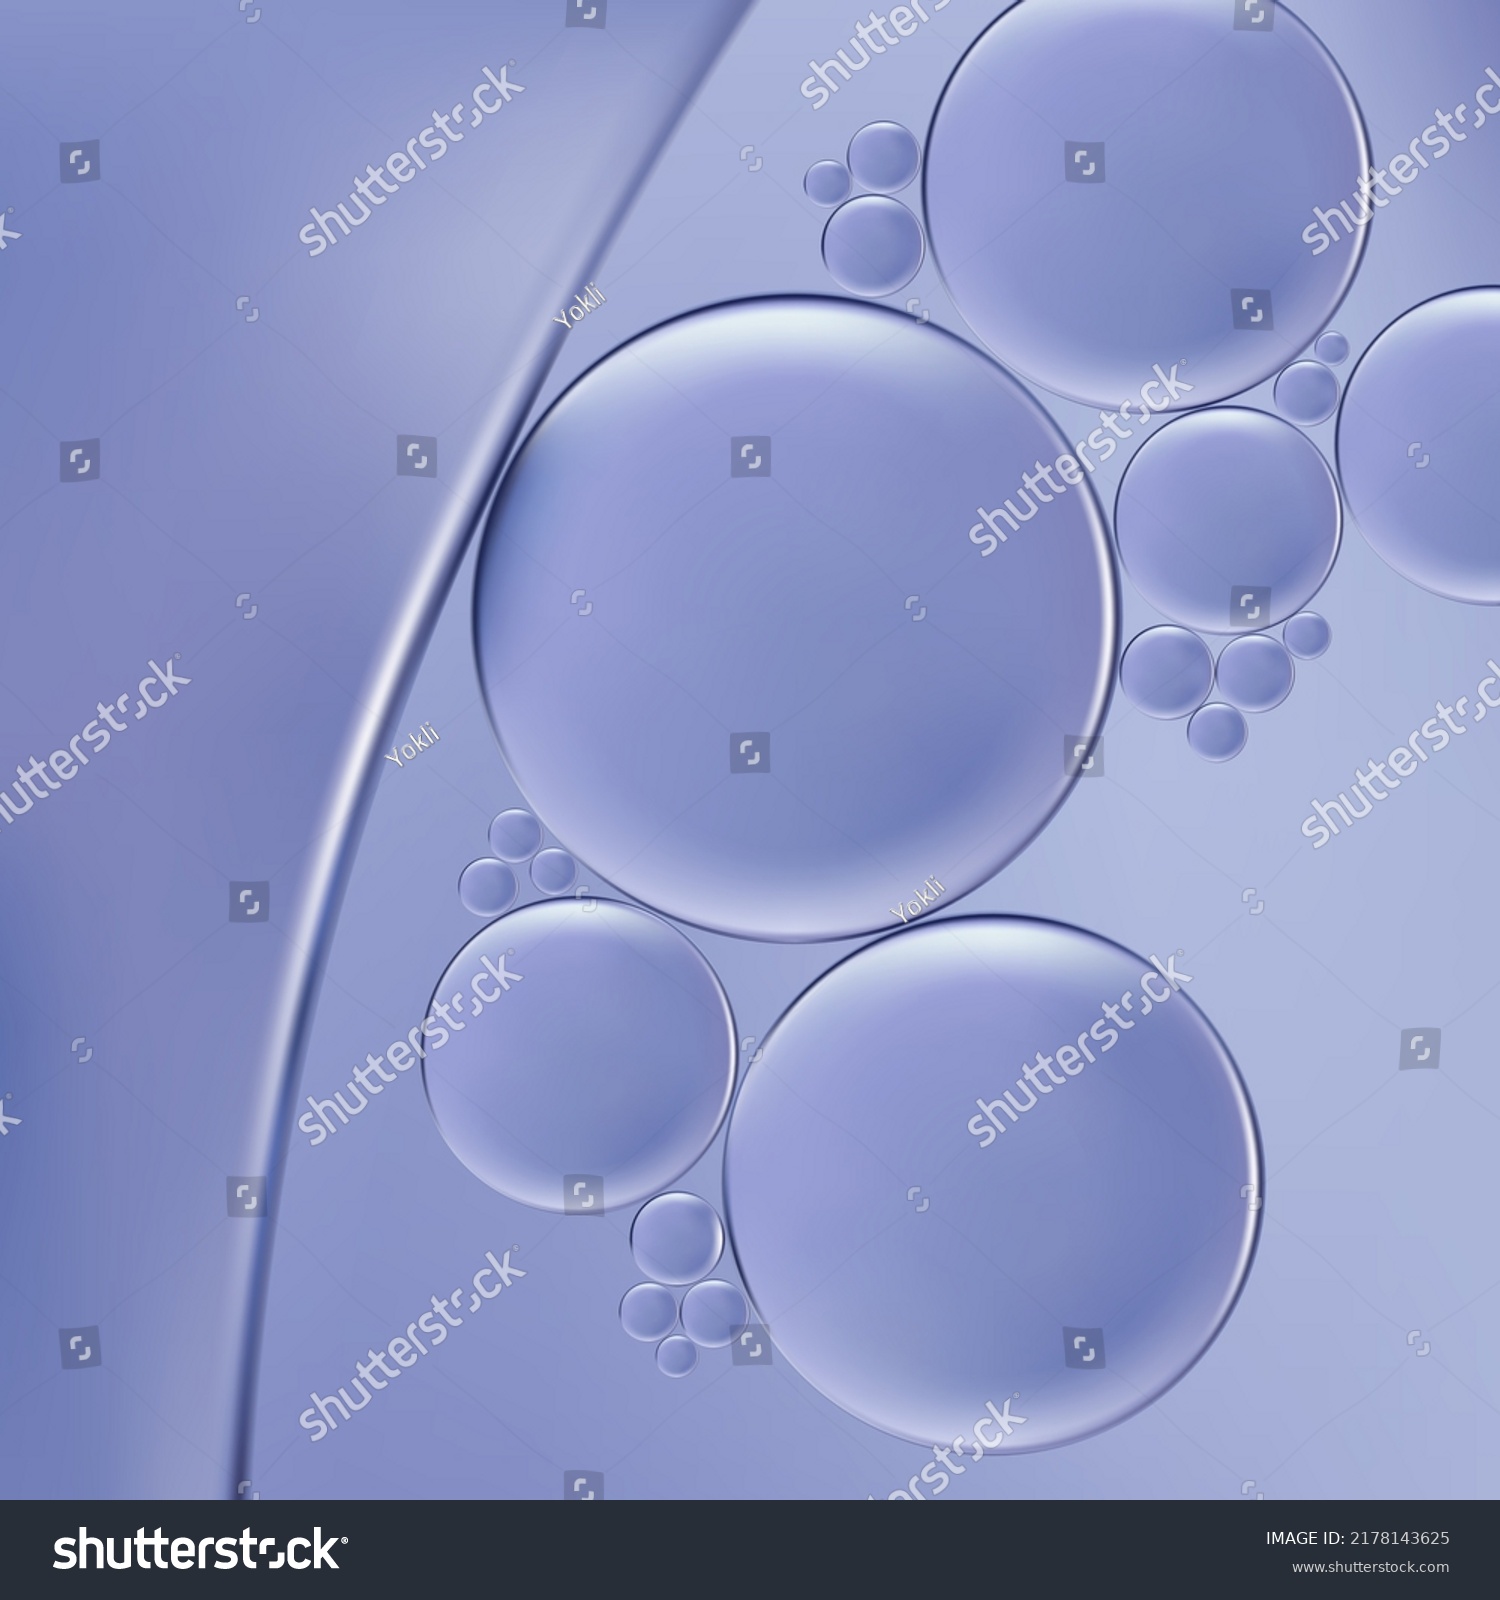 Vector Realistic Macro Beauty and Cosmetics Clear Gel or Foam Bubbles Element 3D Illustration for Poster, Book Cover or Advertisement Background. #2178143625